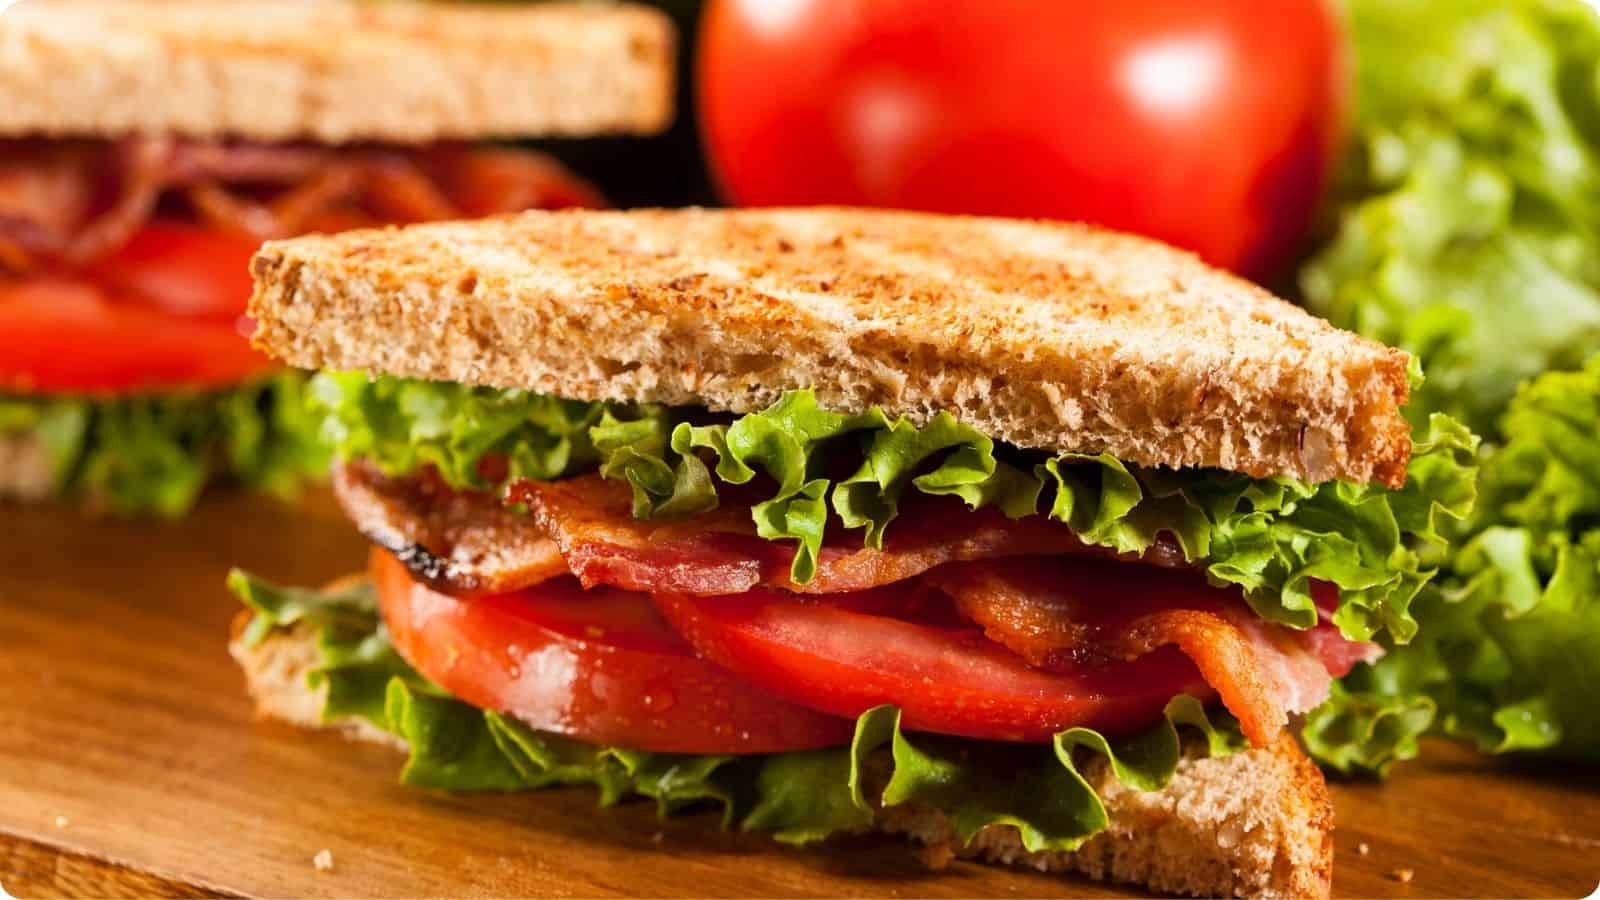 BLT Bacon Lettuce and Tomatoes in a toasted loaf bread.